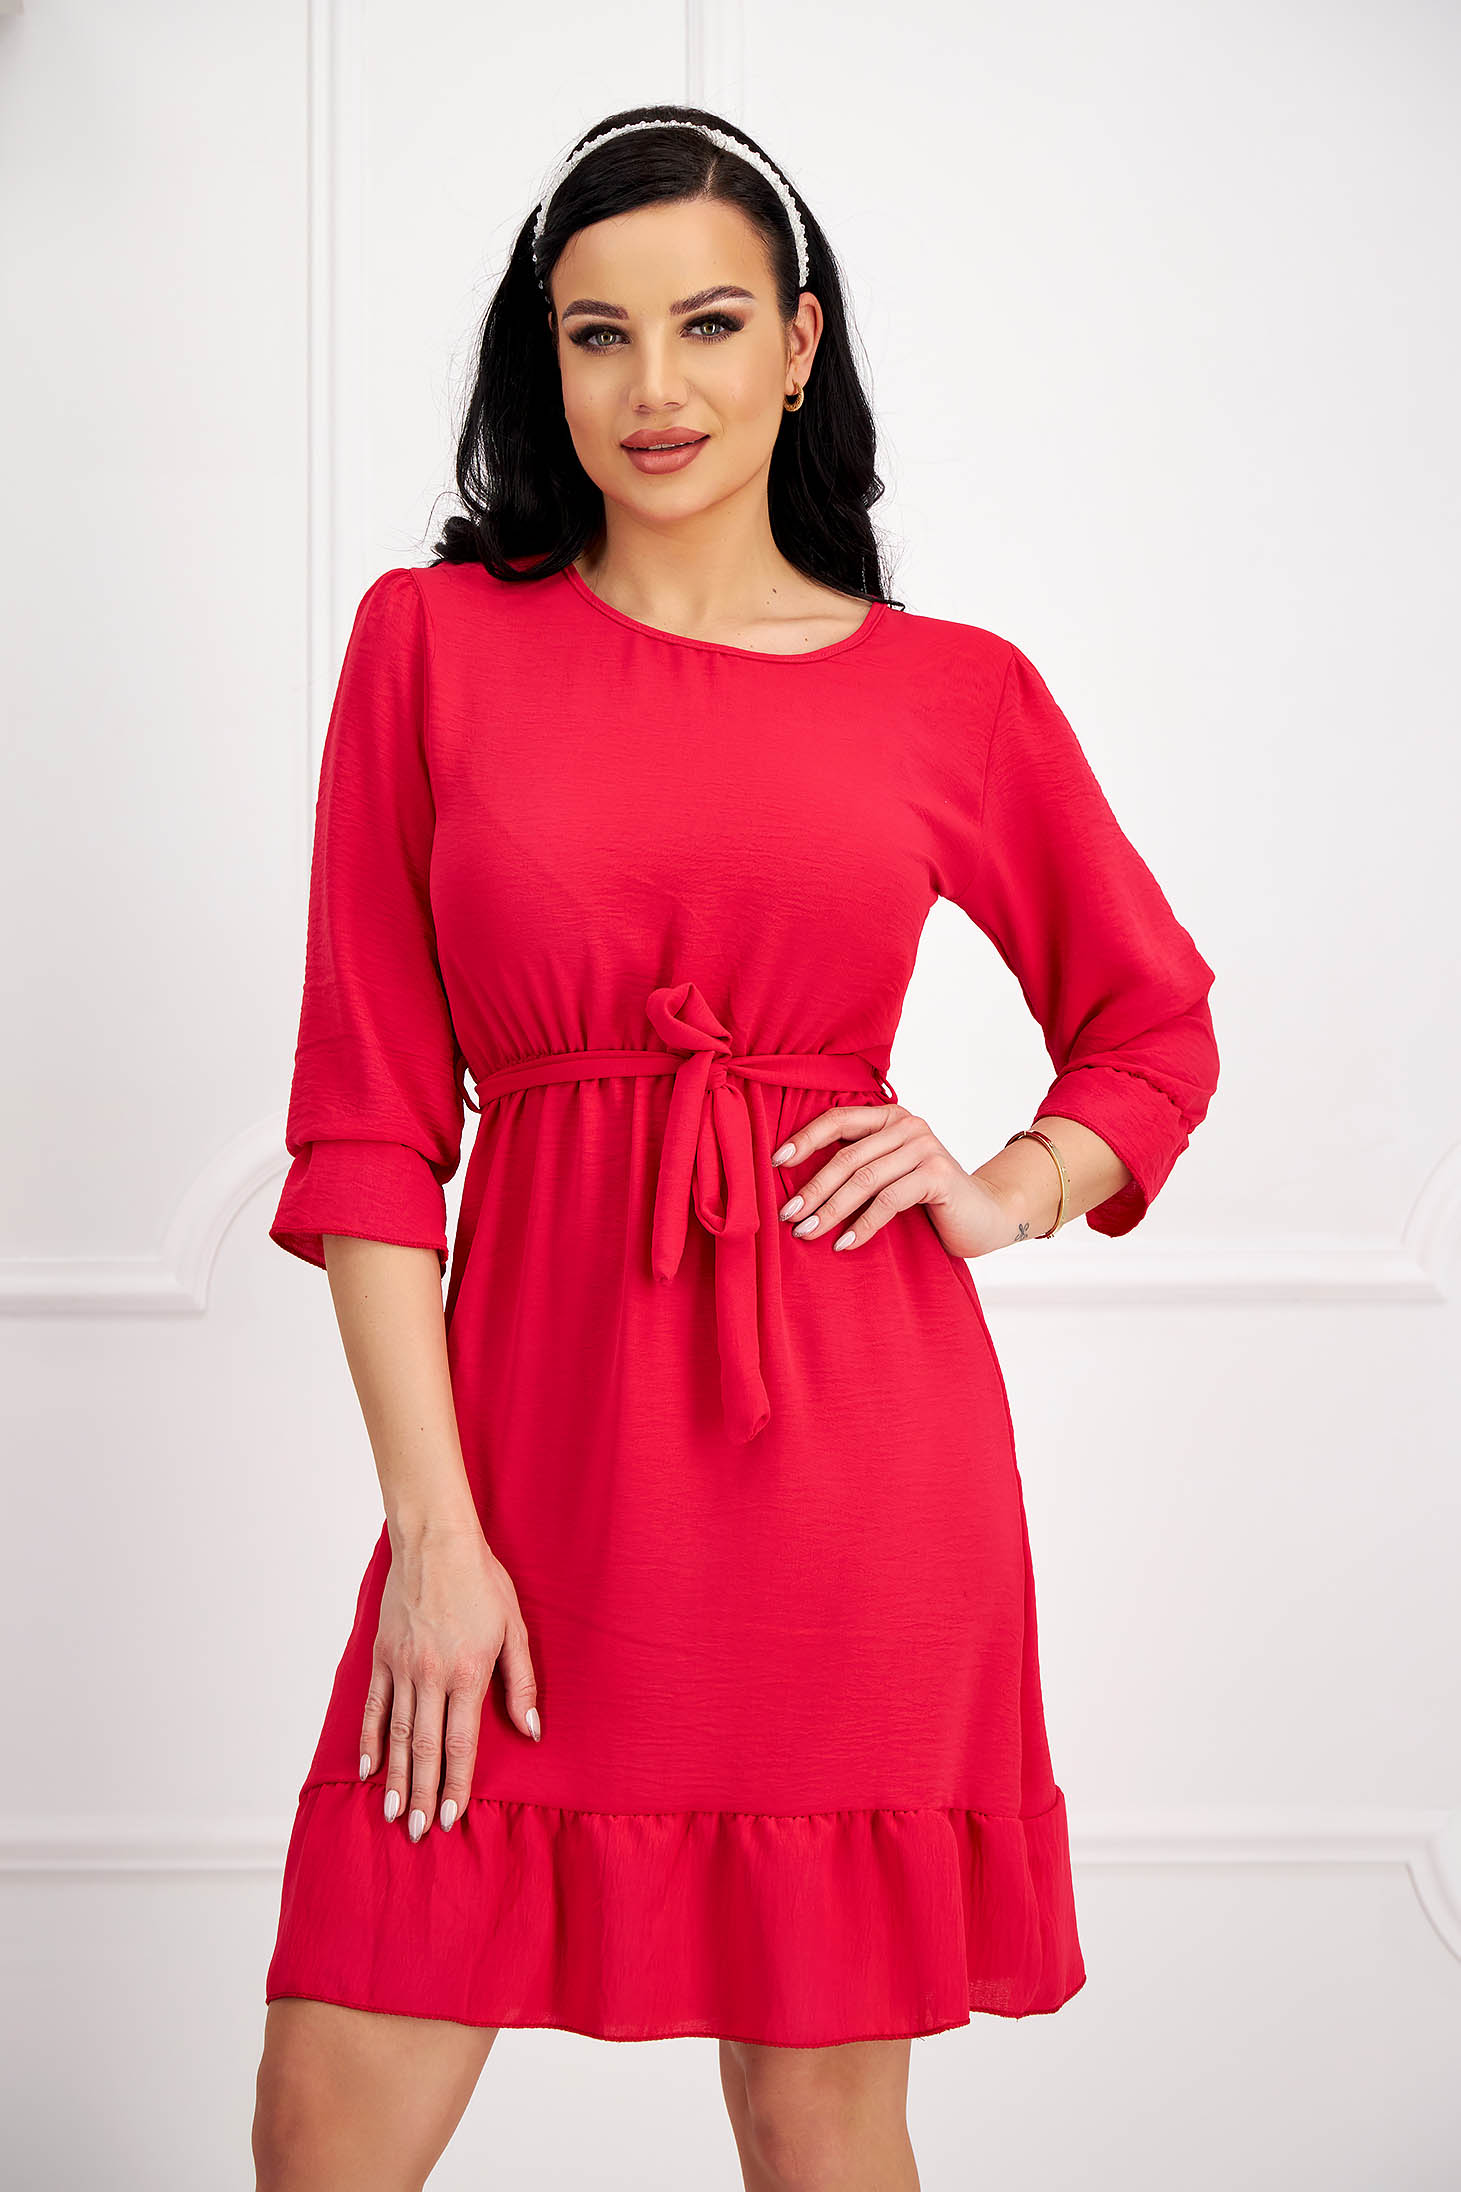 Neon Pink Georgette Dress in A-line with Elastic Waist and Detachable Belt - Lady Pandora 1 - StarShinerS.com